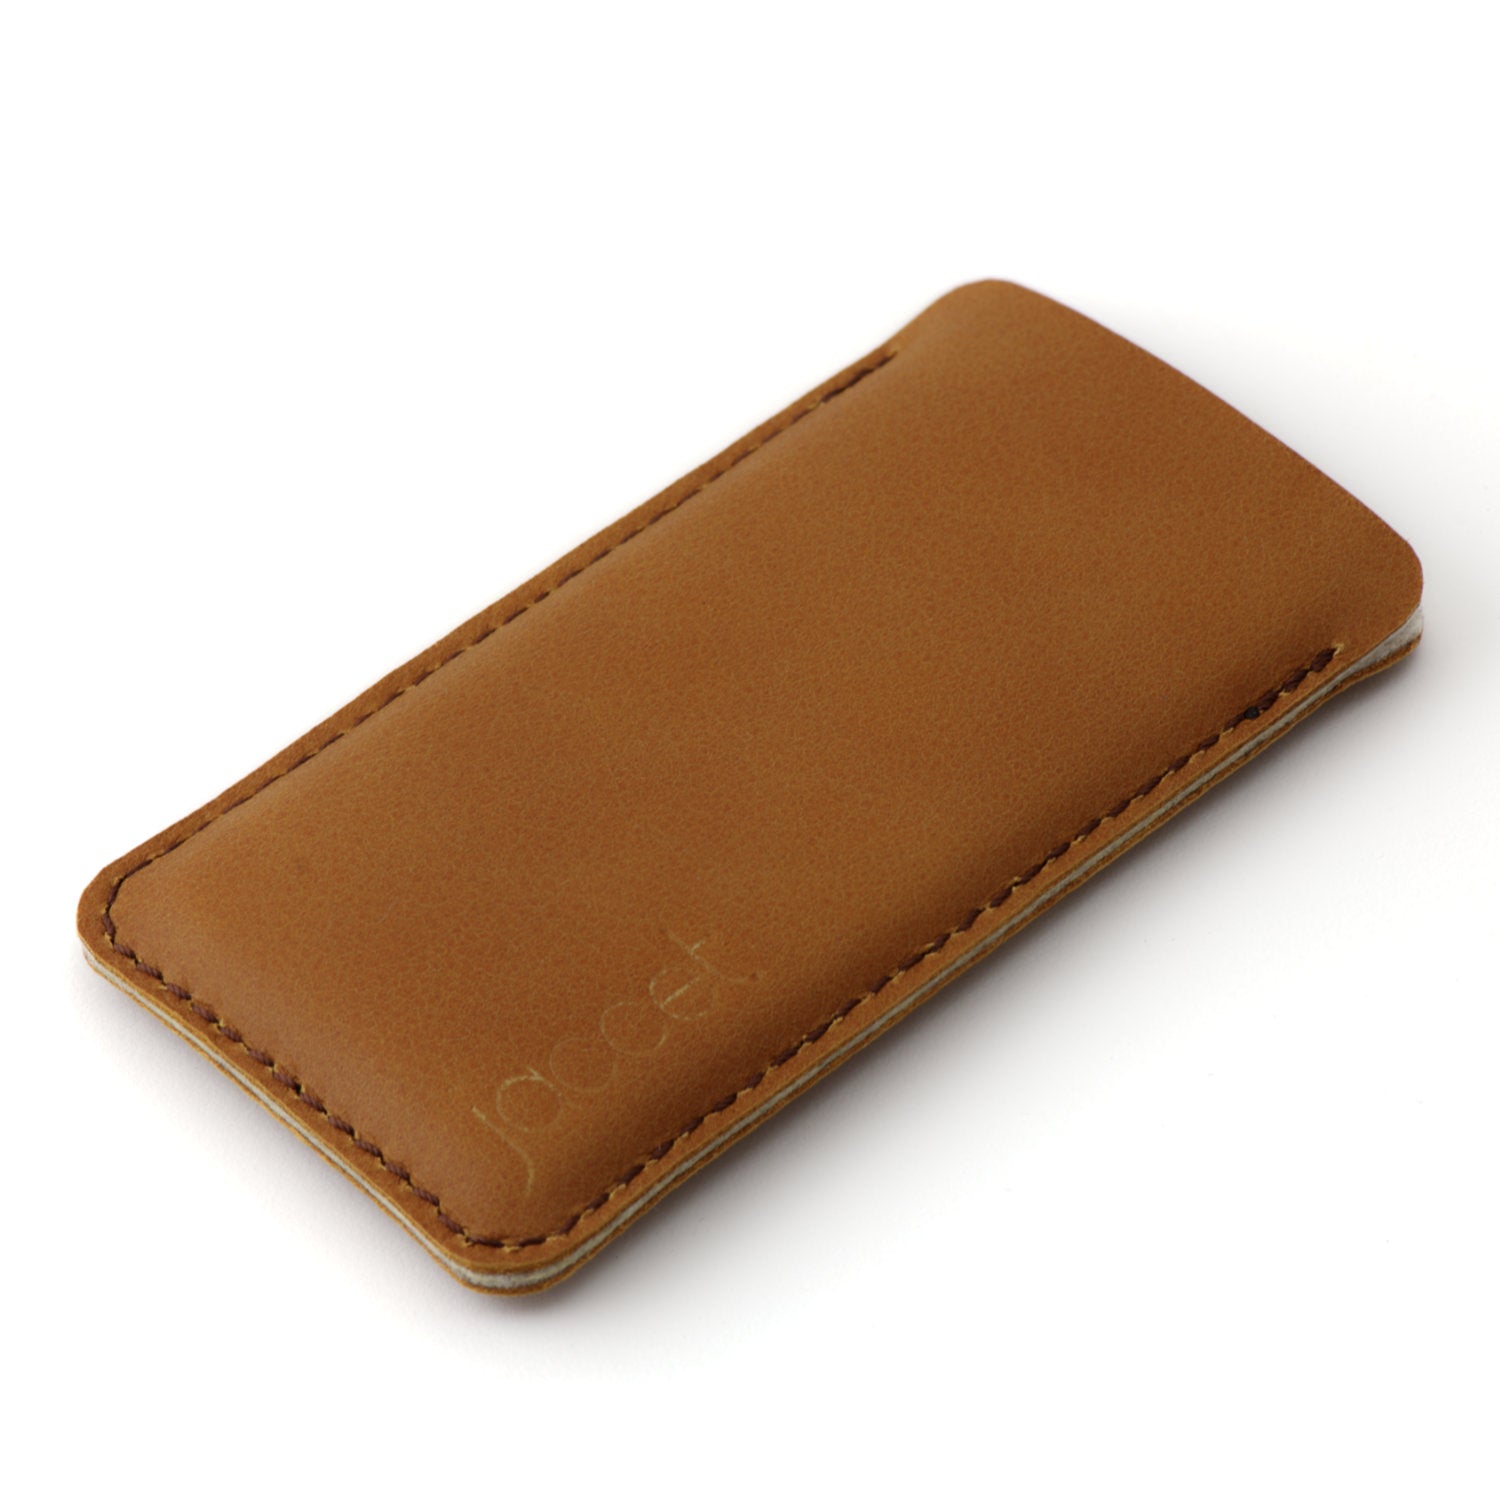 JACCET leather Xiaomi sleeve - Cognac color leather with brown wool felt - 100% Handmade